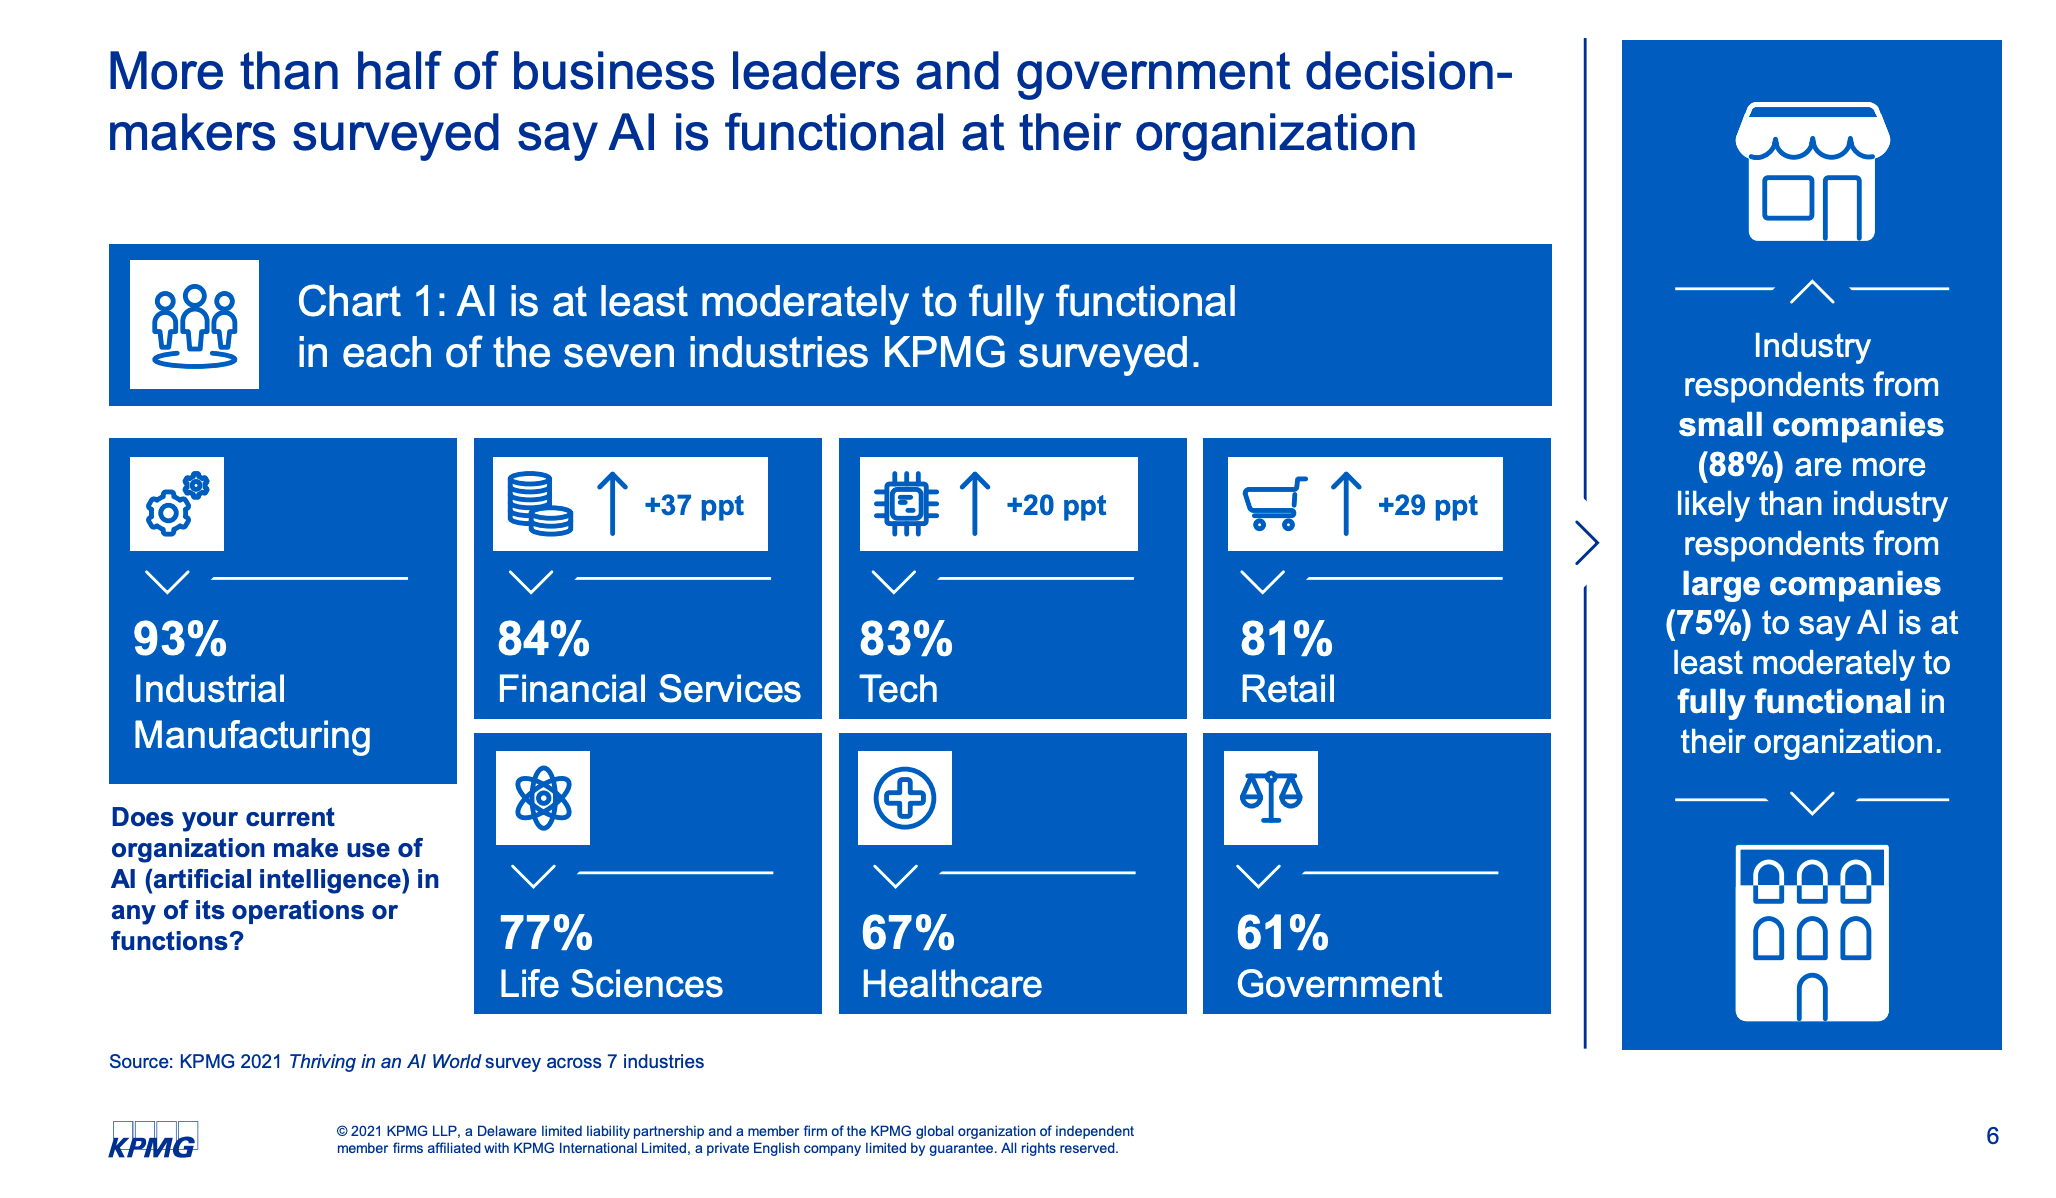 AI is at least moderately to fully functional in each of the seven industries KPMG surveyed. Credit: KPMG's Thriving in an AI World